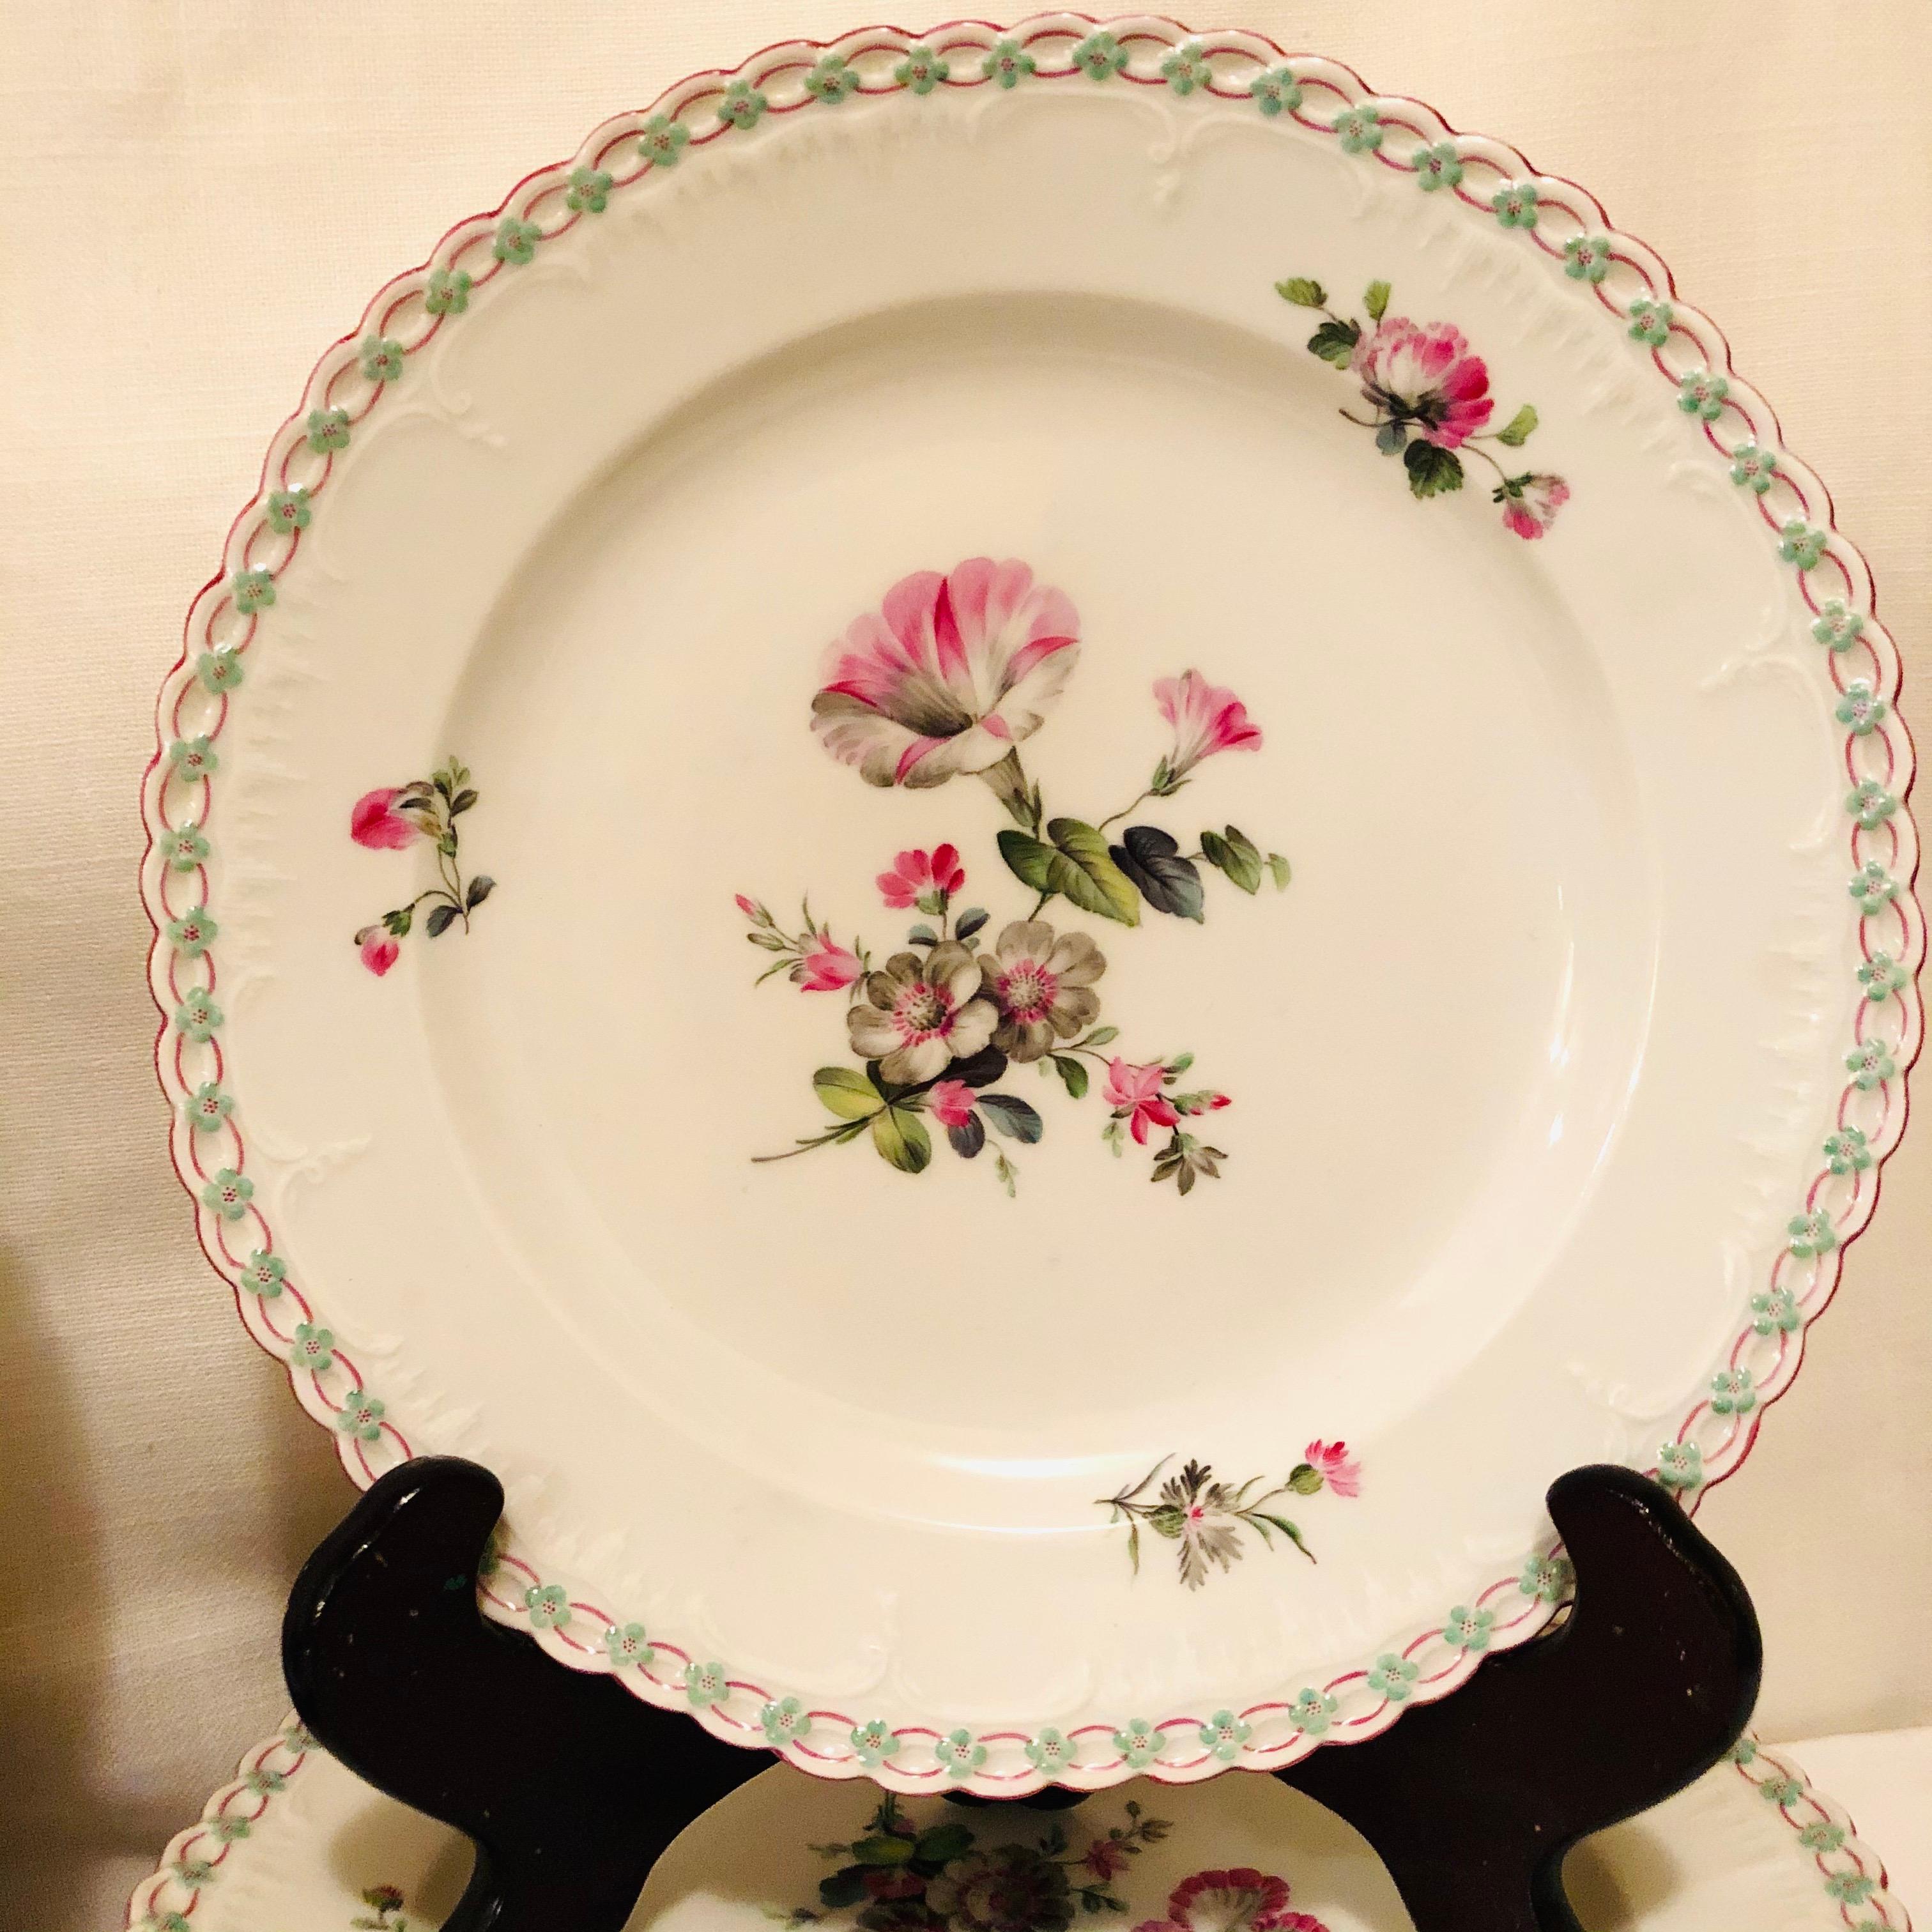 Set of thirteen KPM dinner plates, each painted with different pink and green flower bouquet, with raised forget me nots. The border is fluted and has a pink oval design with blue raised forget me nots. These can be used on your table setting as a